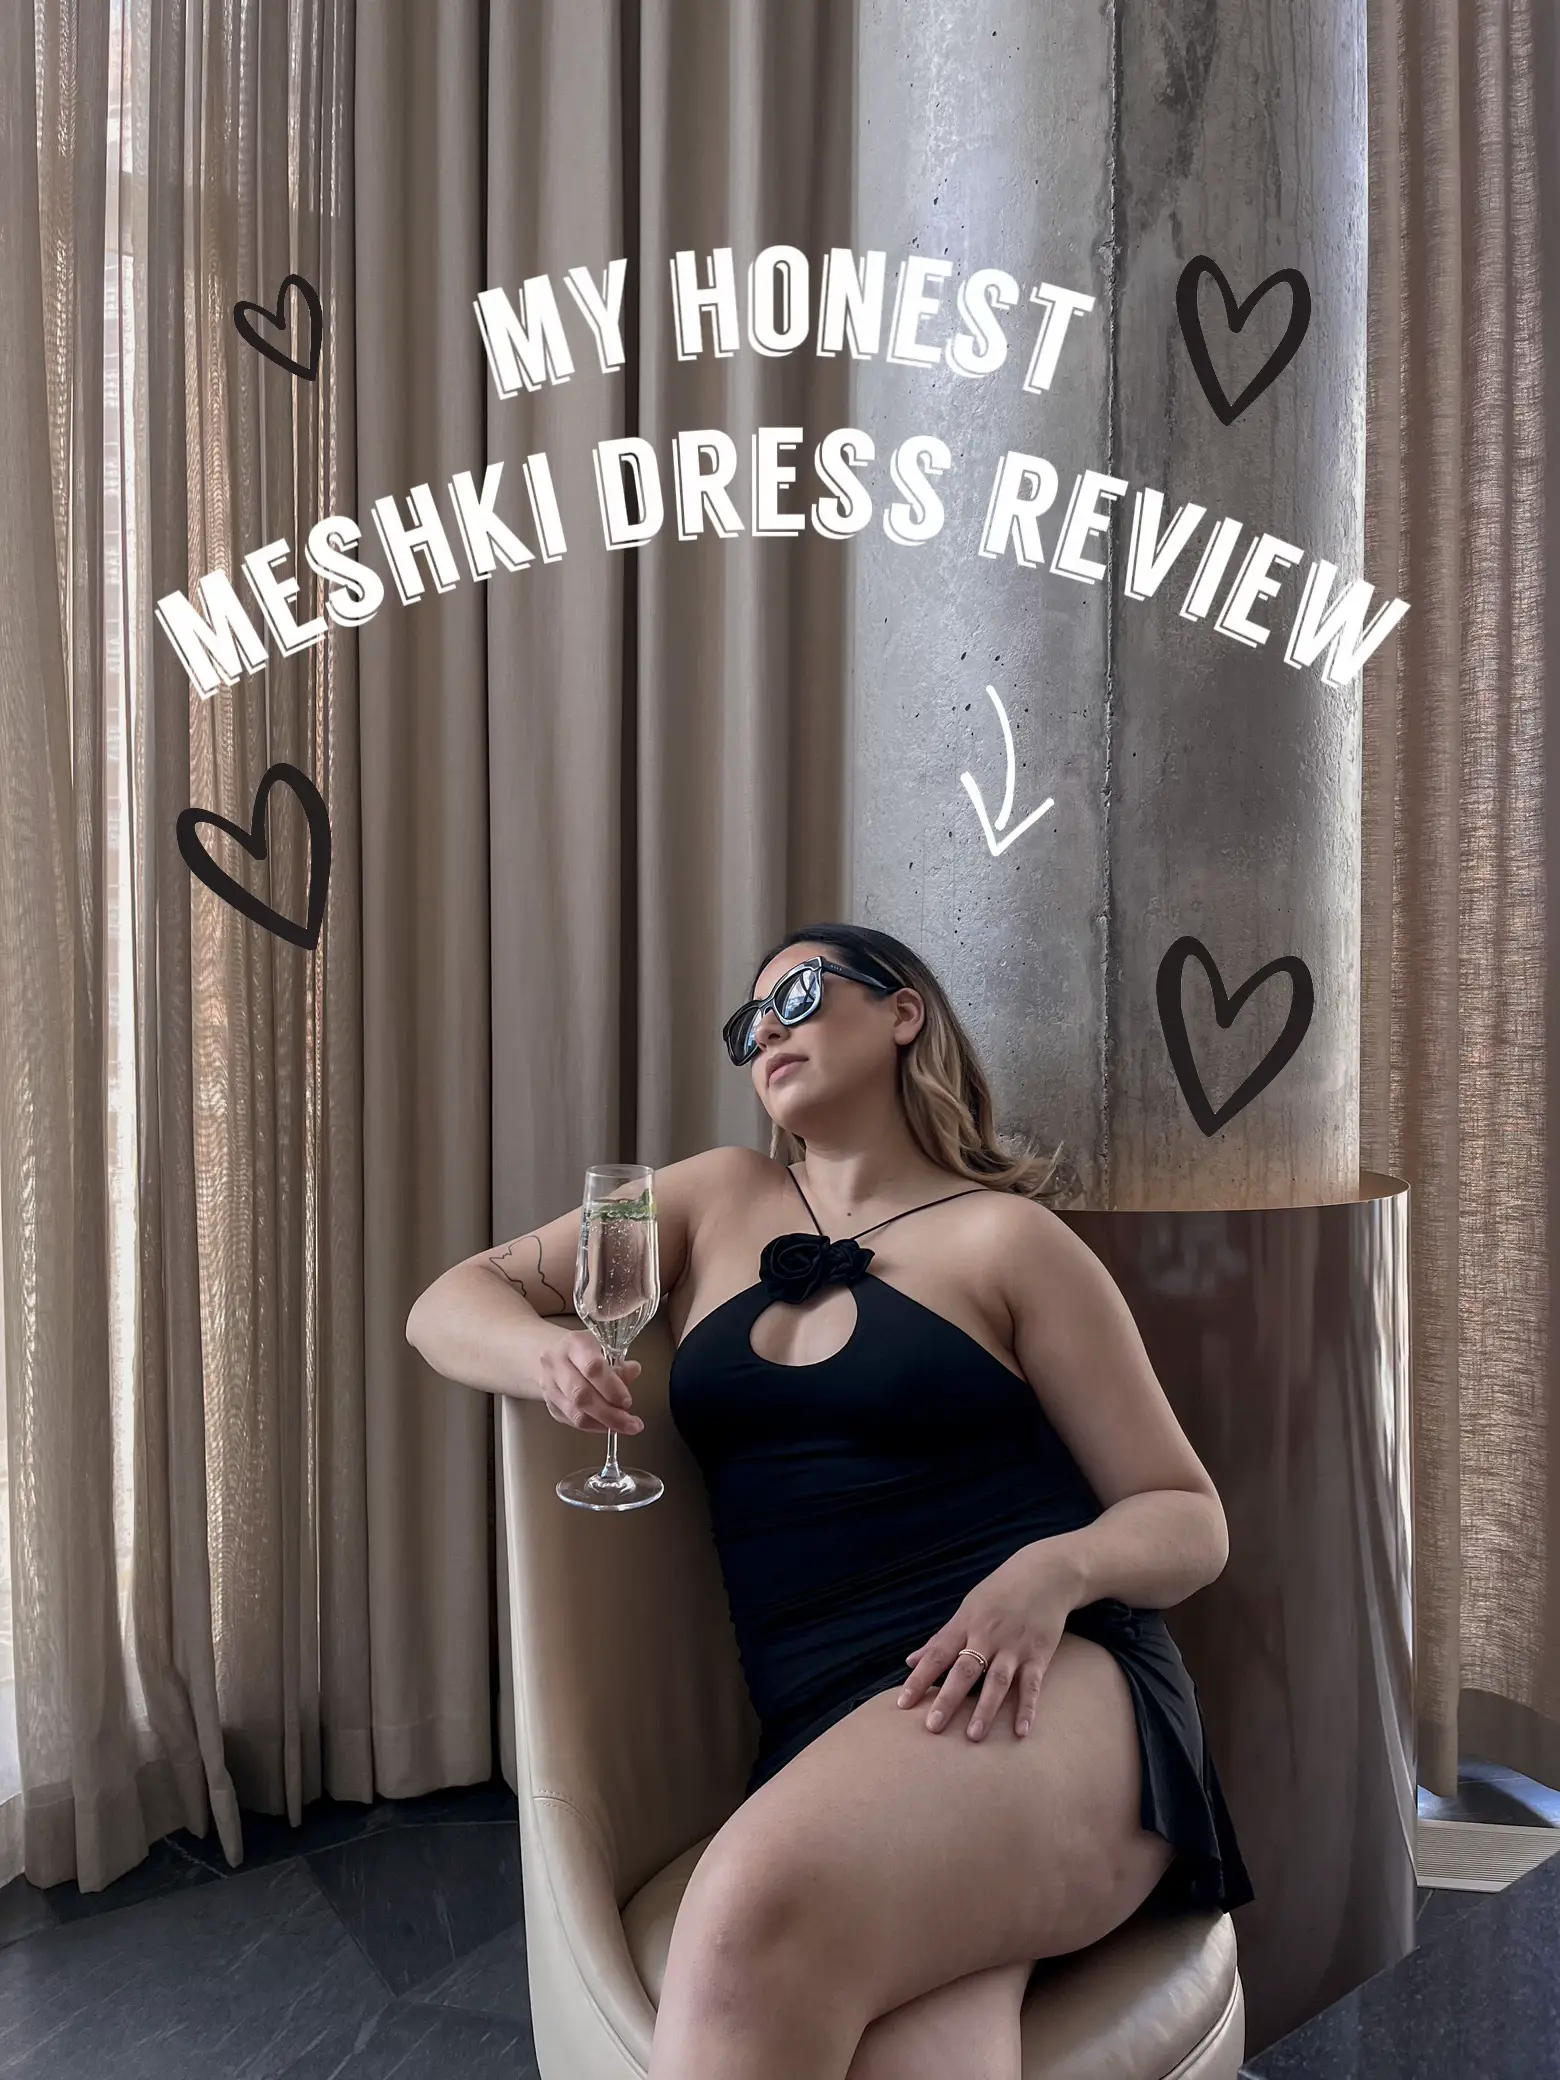 Meshki - The definition of treating yourself matching lingerie